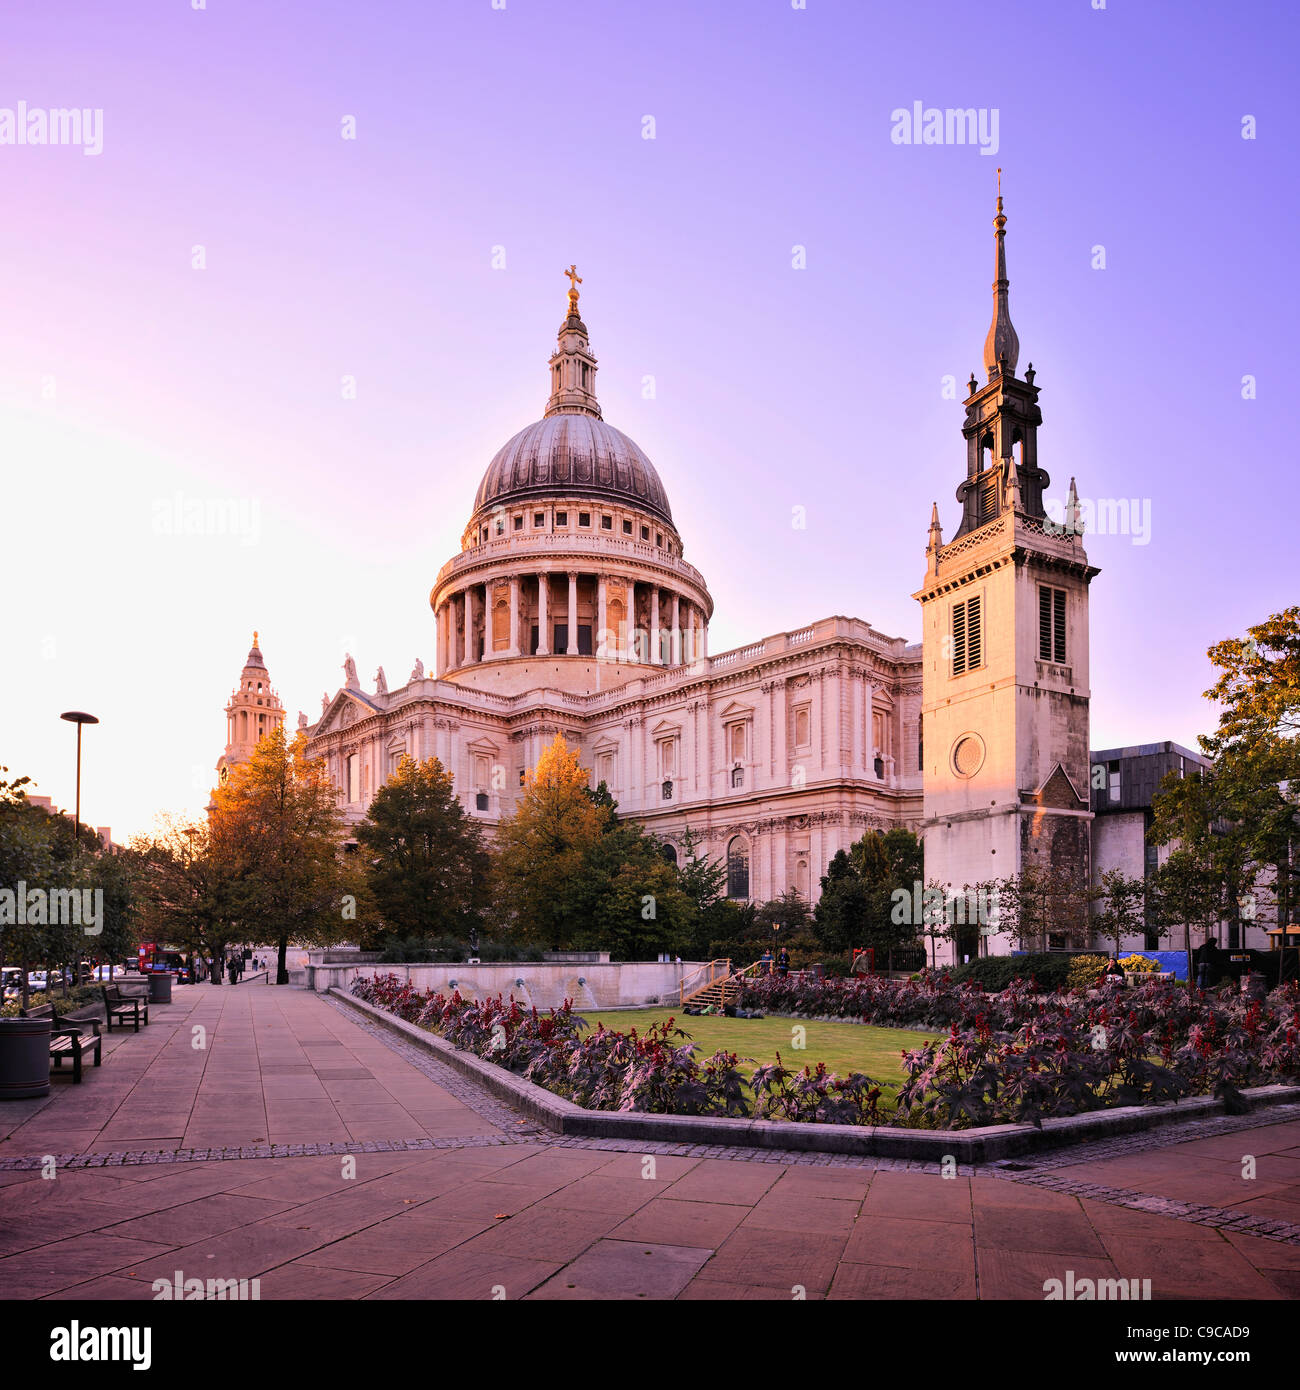 St. Paul's Cathedral at dusk, London Stock Photo